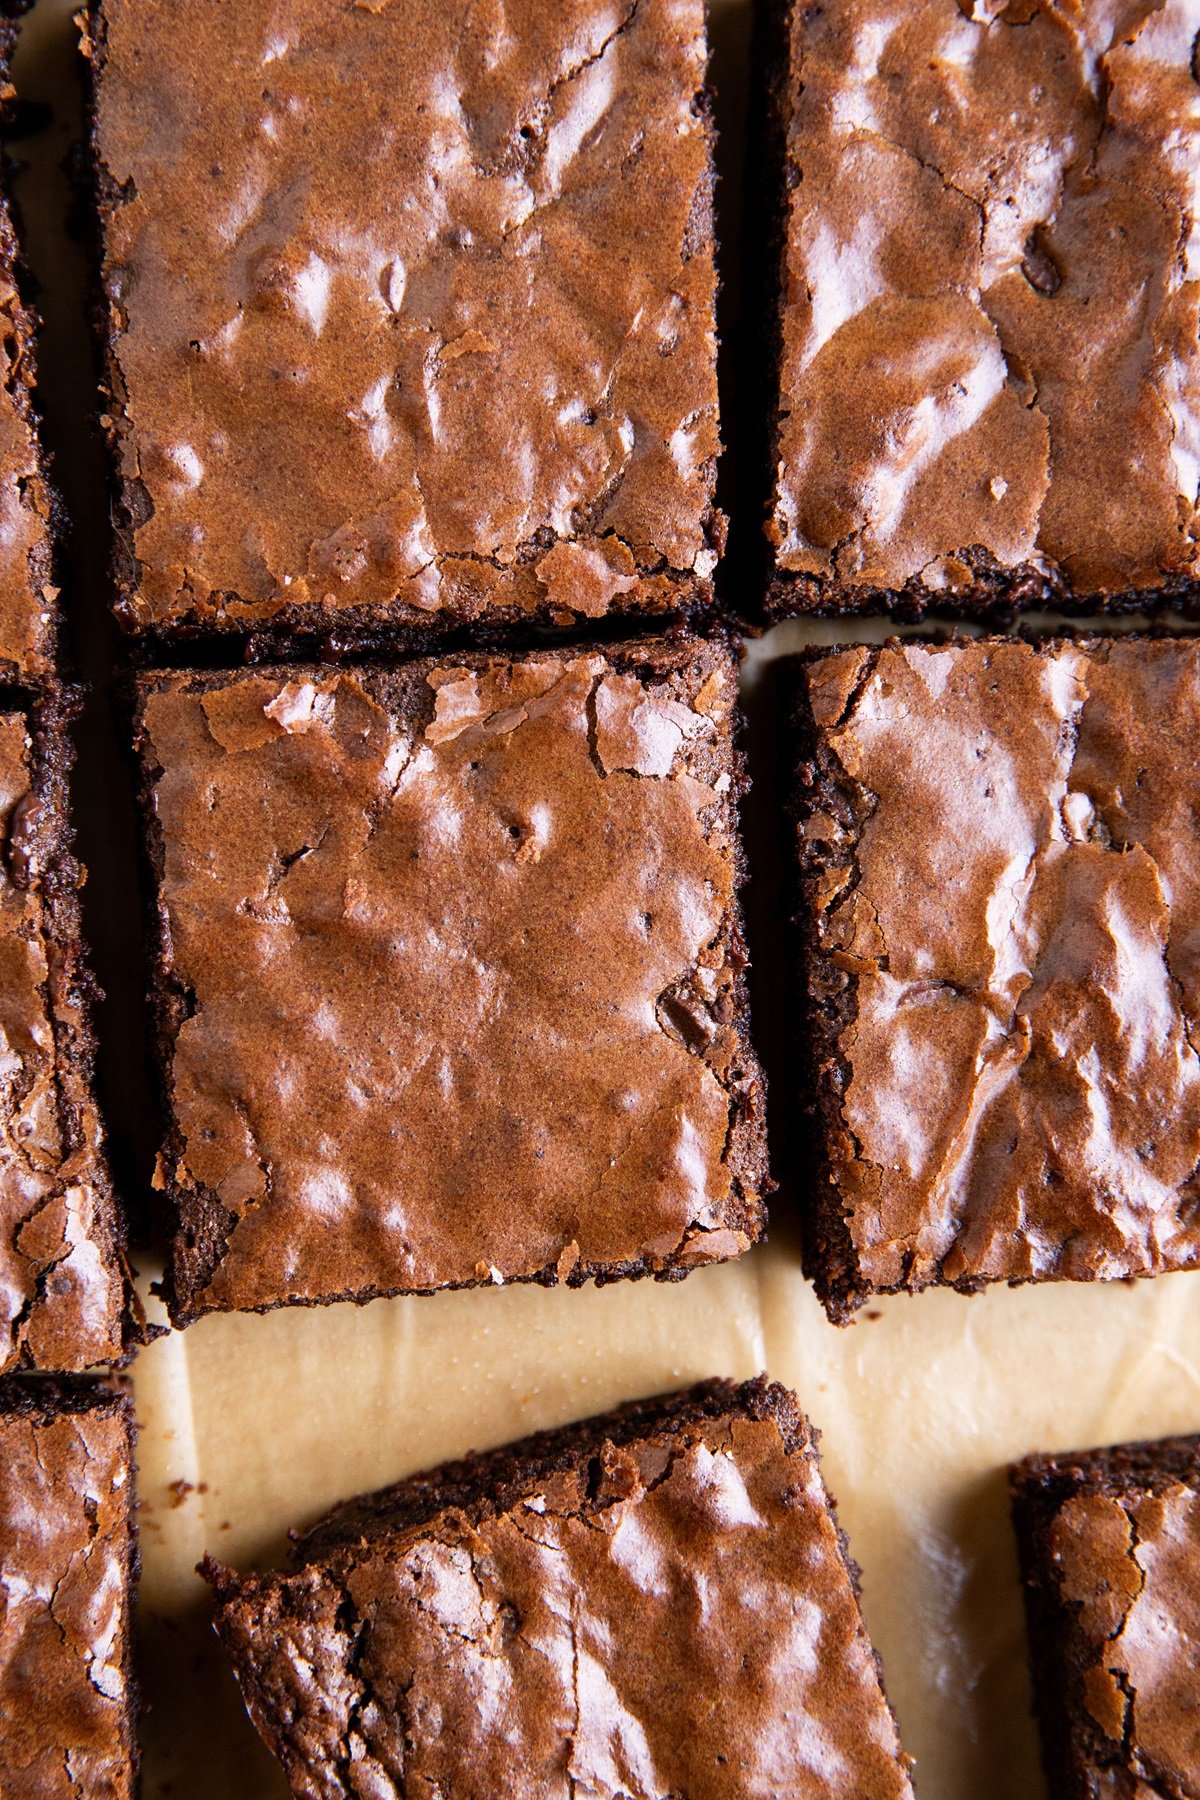 Gluten-free brownies with shiny crackle top, cut into slices.